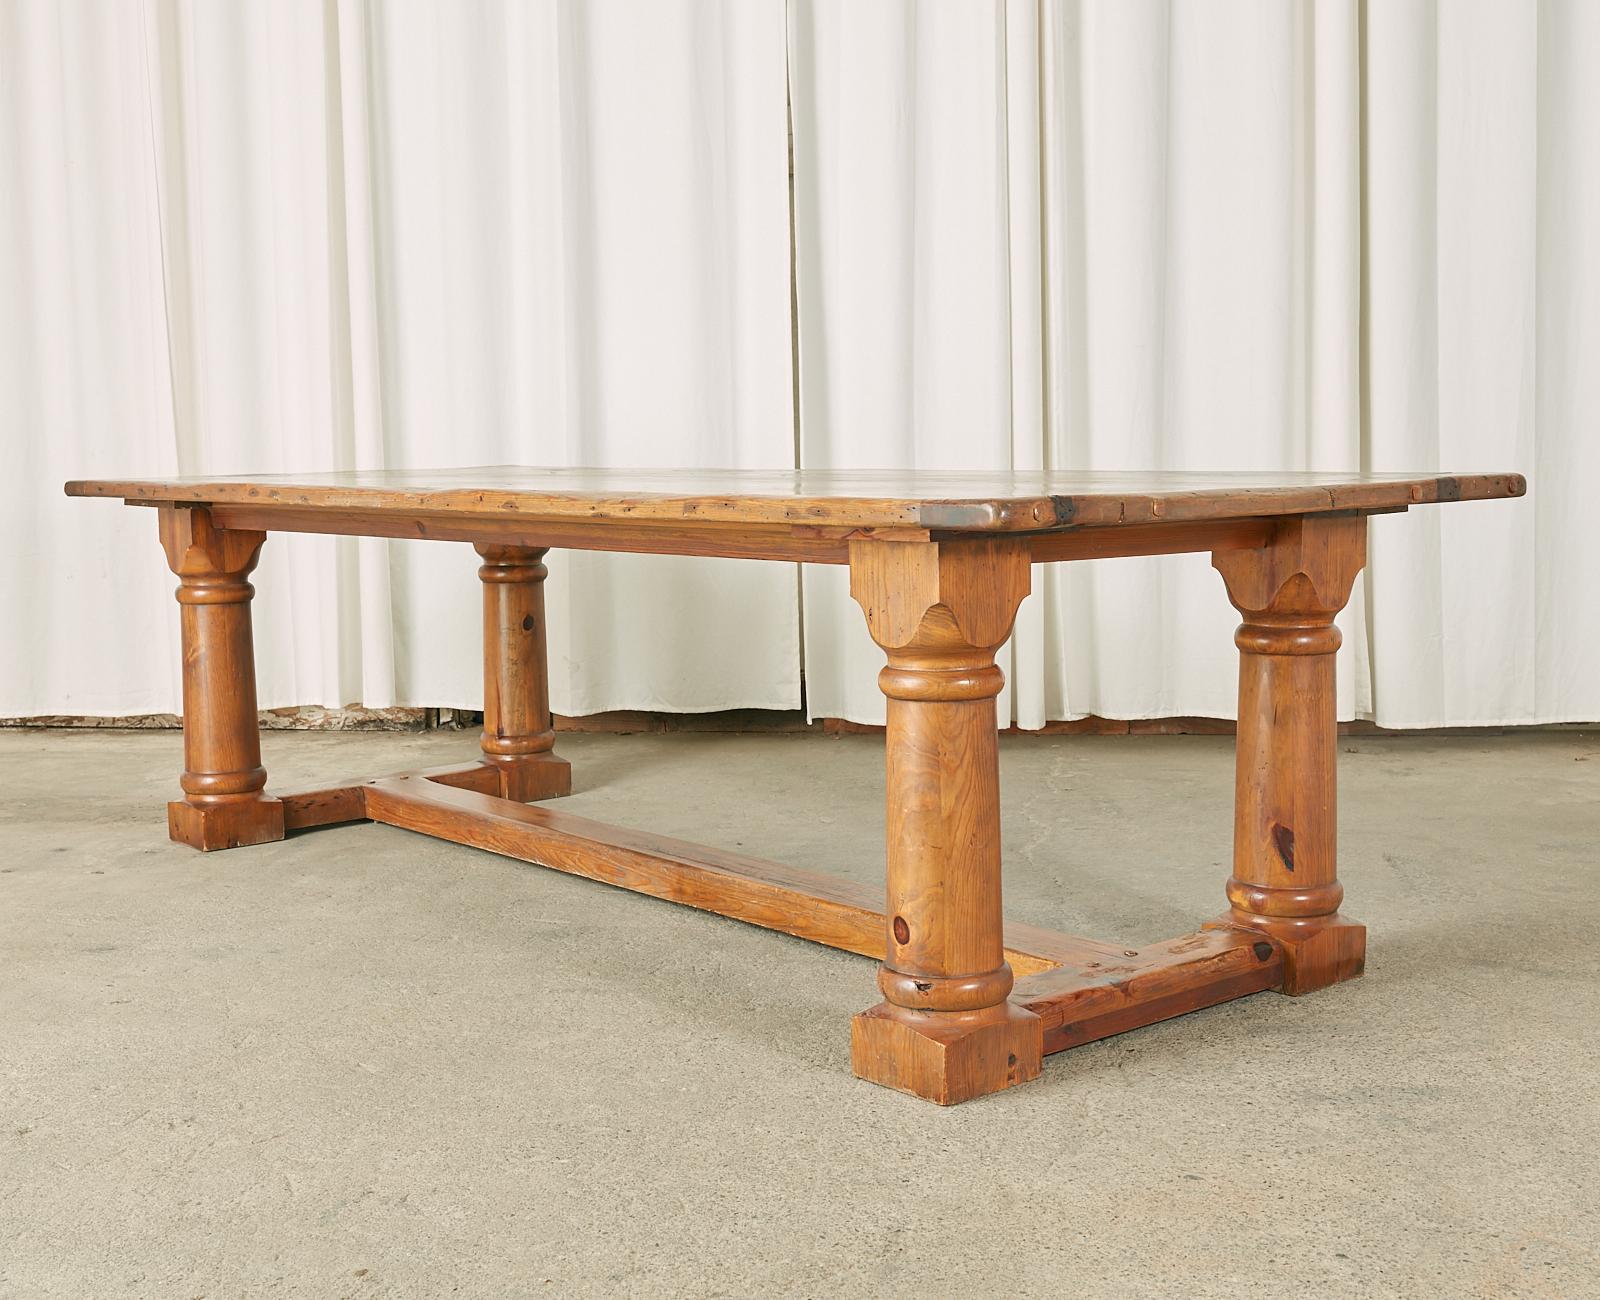 Grand country style pine farmhouse trestle dining or harvest table designed by Ralph Lauren. The large 